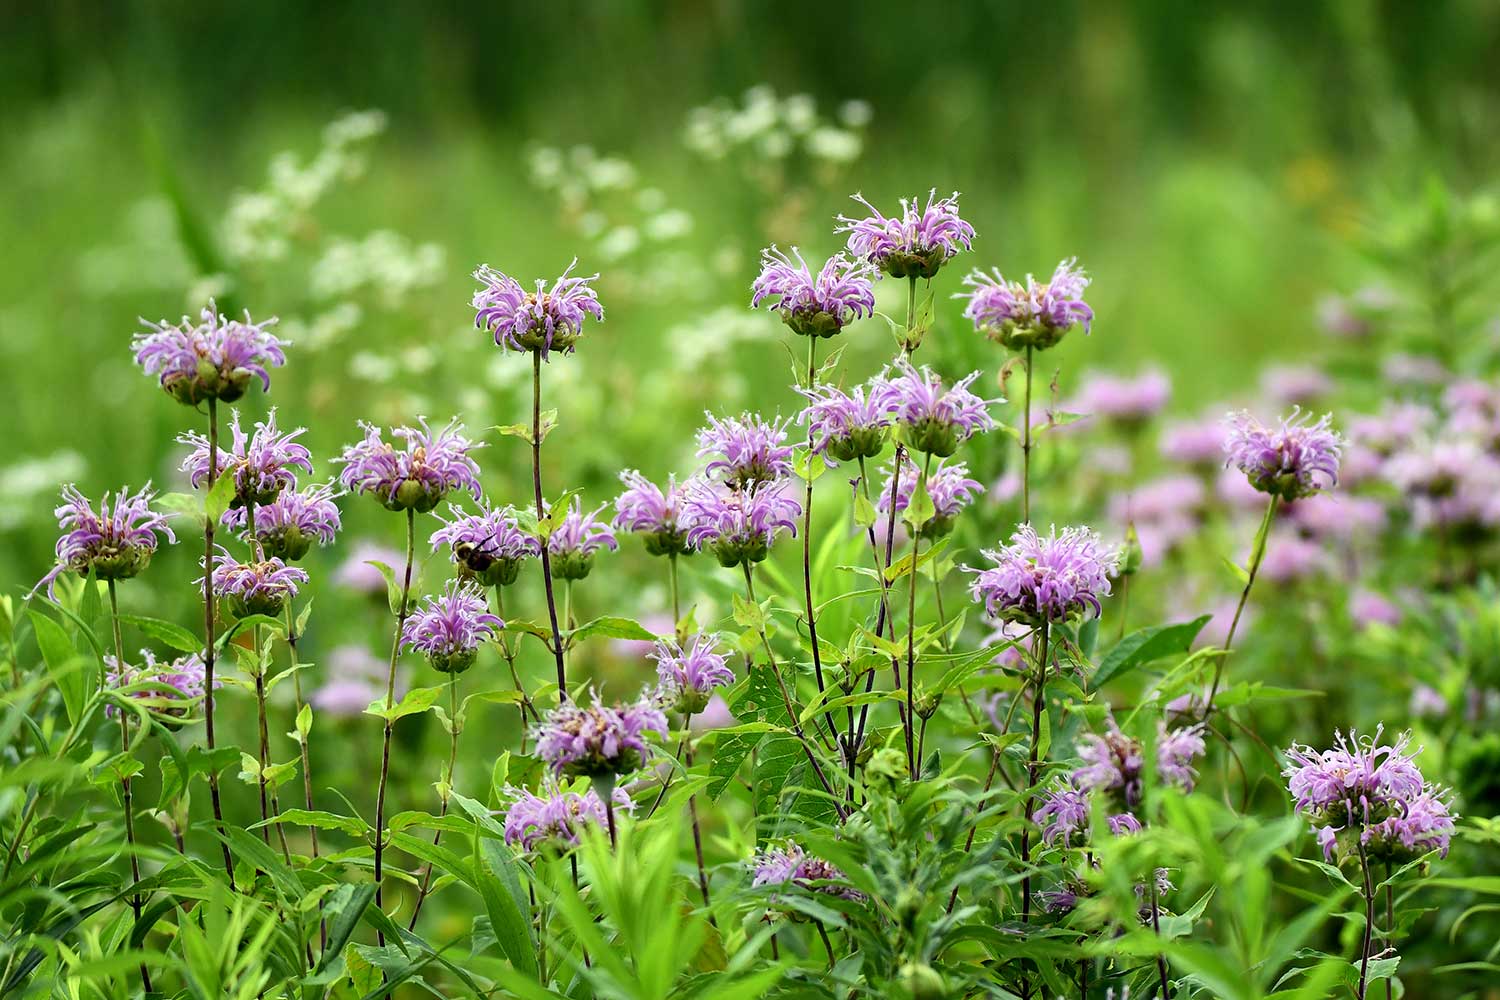 A cluster of lavender-colored wild bergamot blooms surrounded by other vegetation.